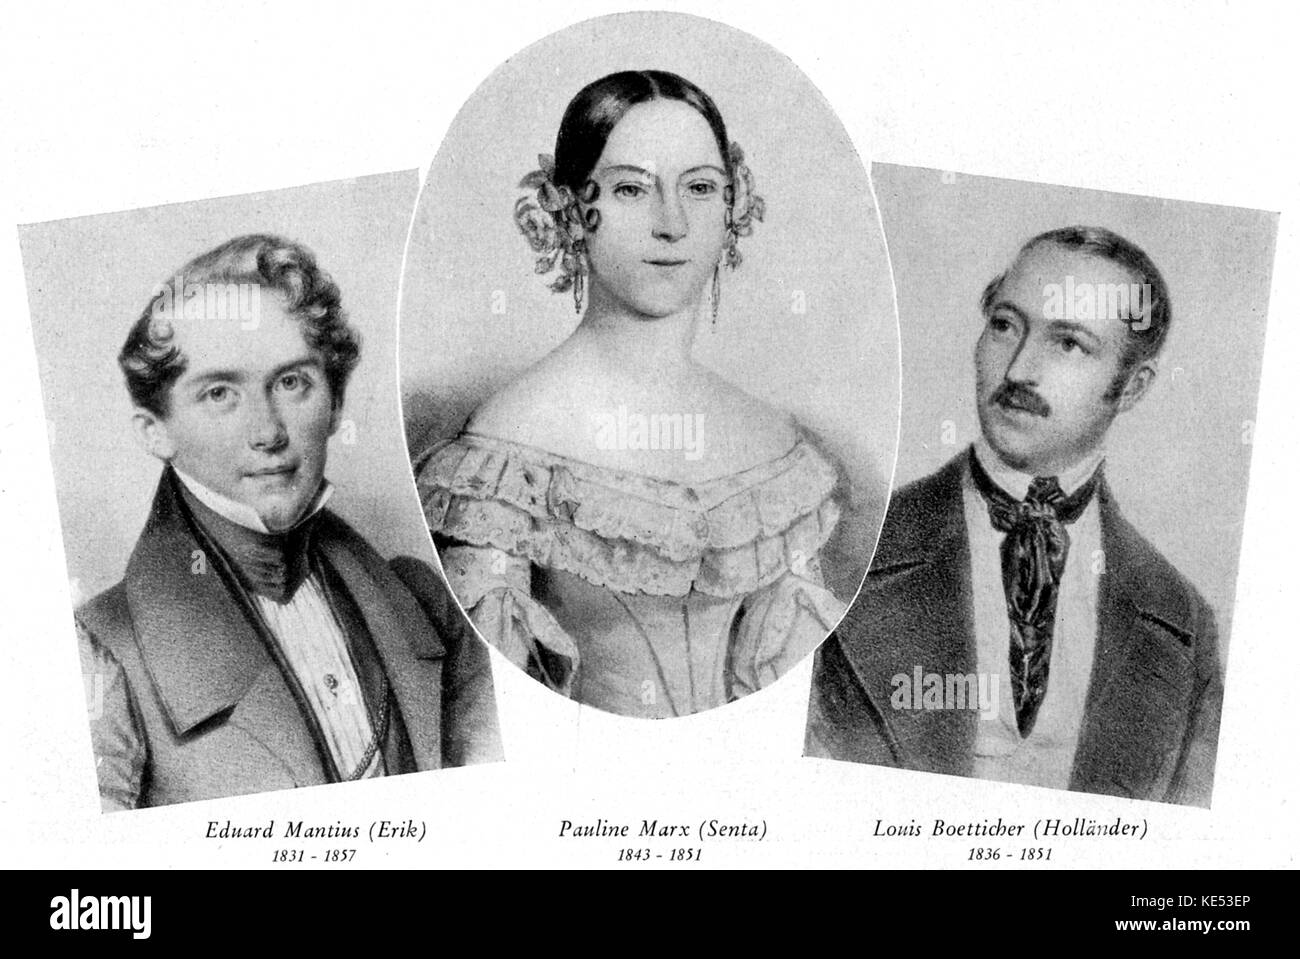 Flying Dutchman (Der fliegende Höllander) - the leading cast members of the Berlin premiere, performed on 7 January, 1844 at the Royal Playhouse, Berlin. From left: Eduard Mantius who played Erik, Pauline Marx who played Senta and Louis Boetticher who played Höllander. Wagner acted as conductor for this performance. RW: German composer & author, 1813-1883. Stock Photo